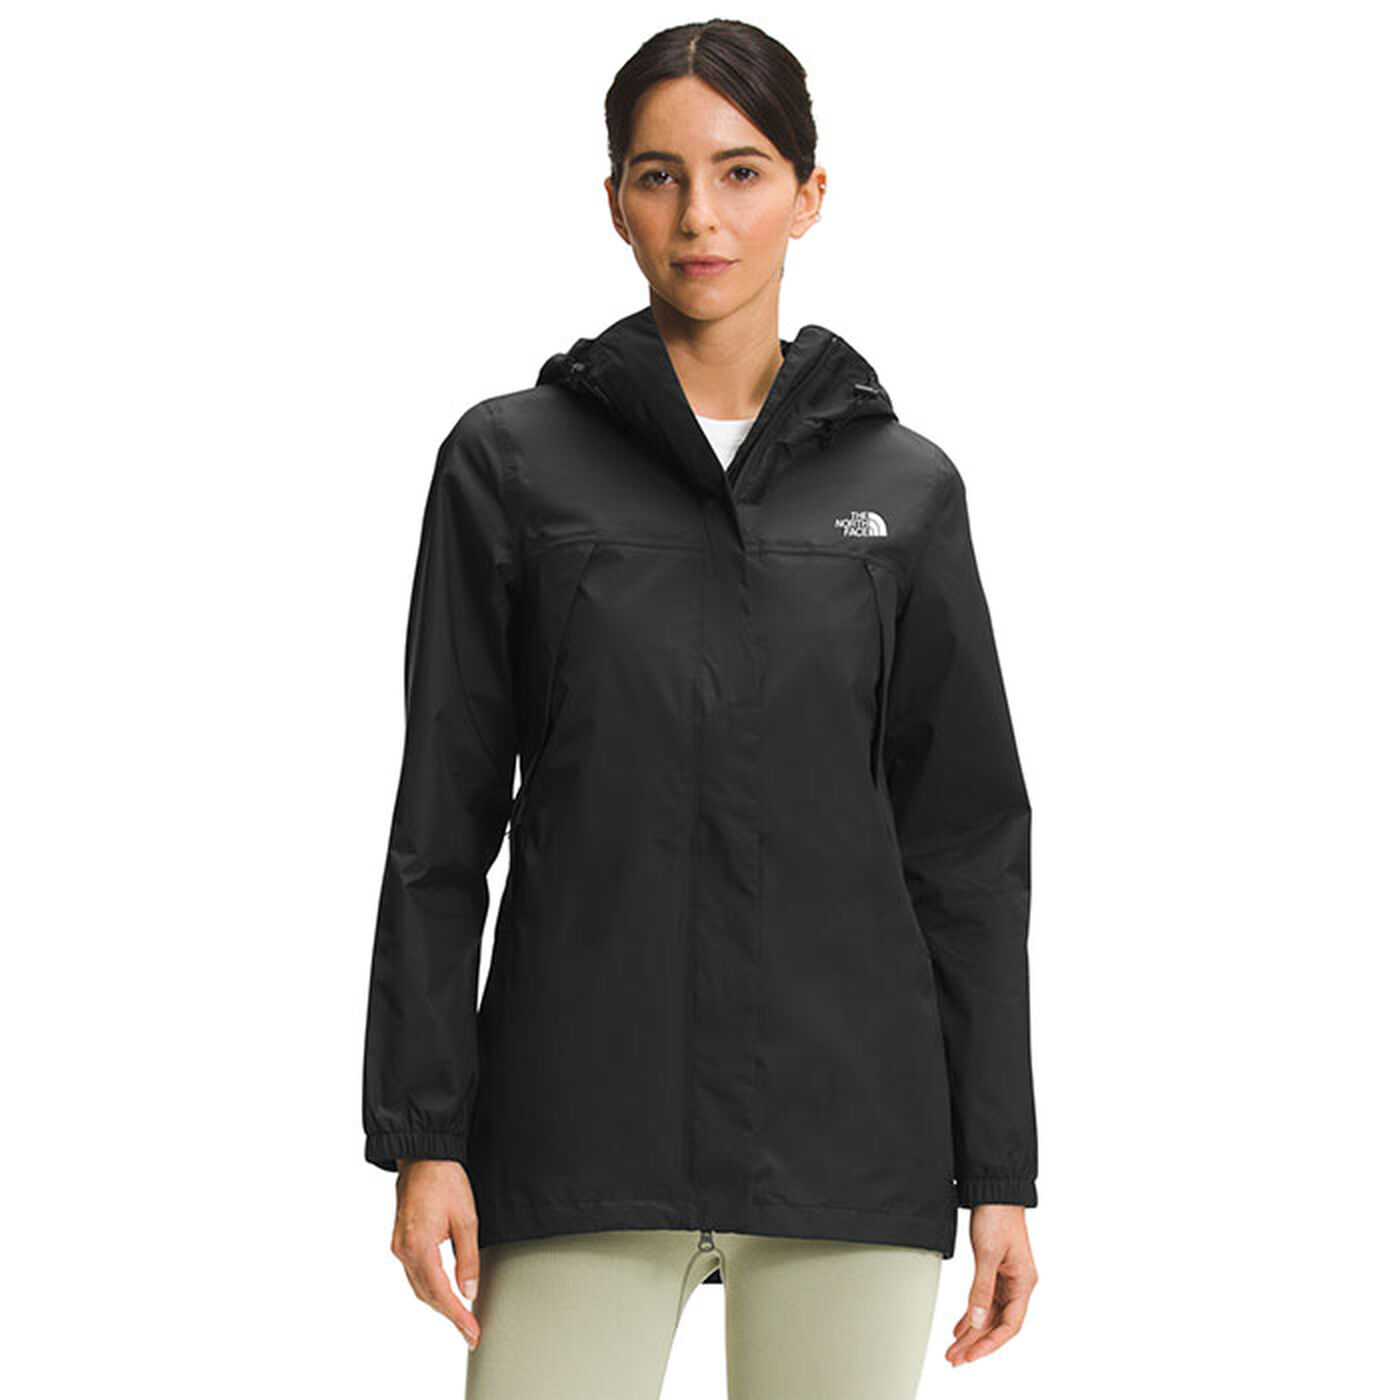 Women's Antora Parka | The North Face | Sporting Life Online